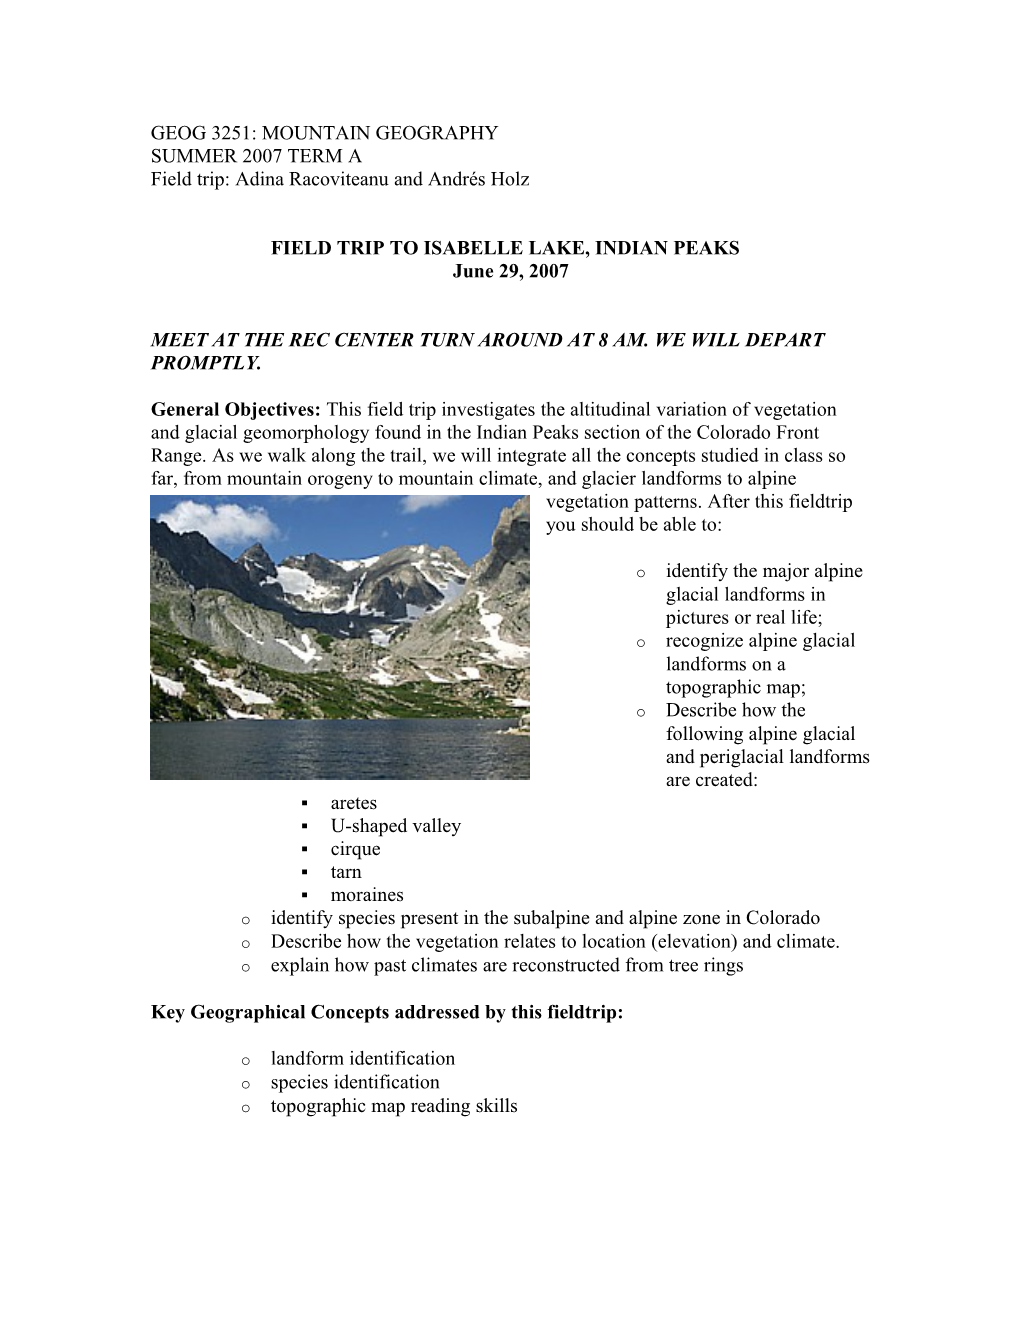 Geog 3251: Mountain Geography